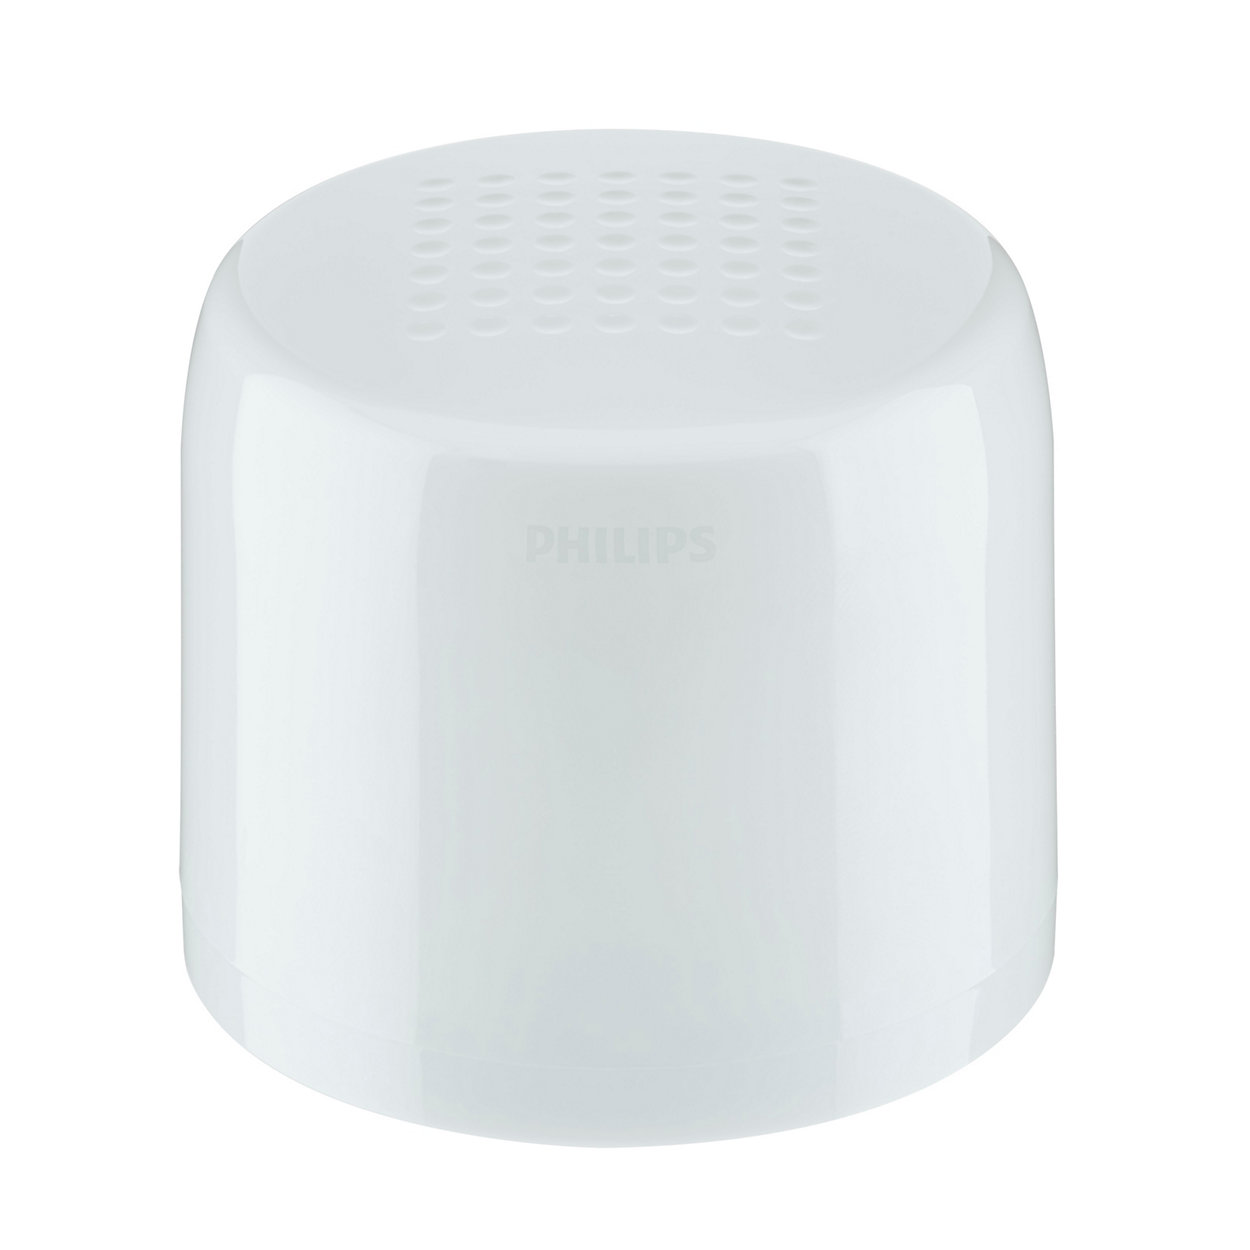 End-to-end wireless intelligent management system for your outdoor lighting